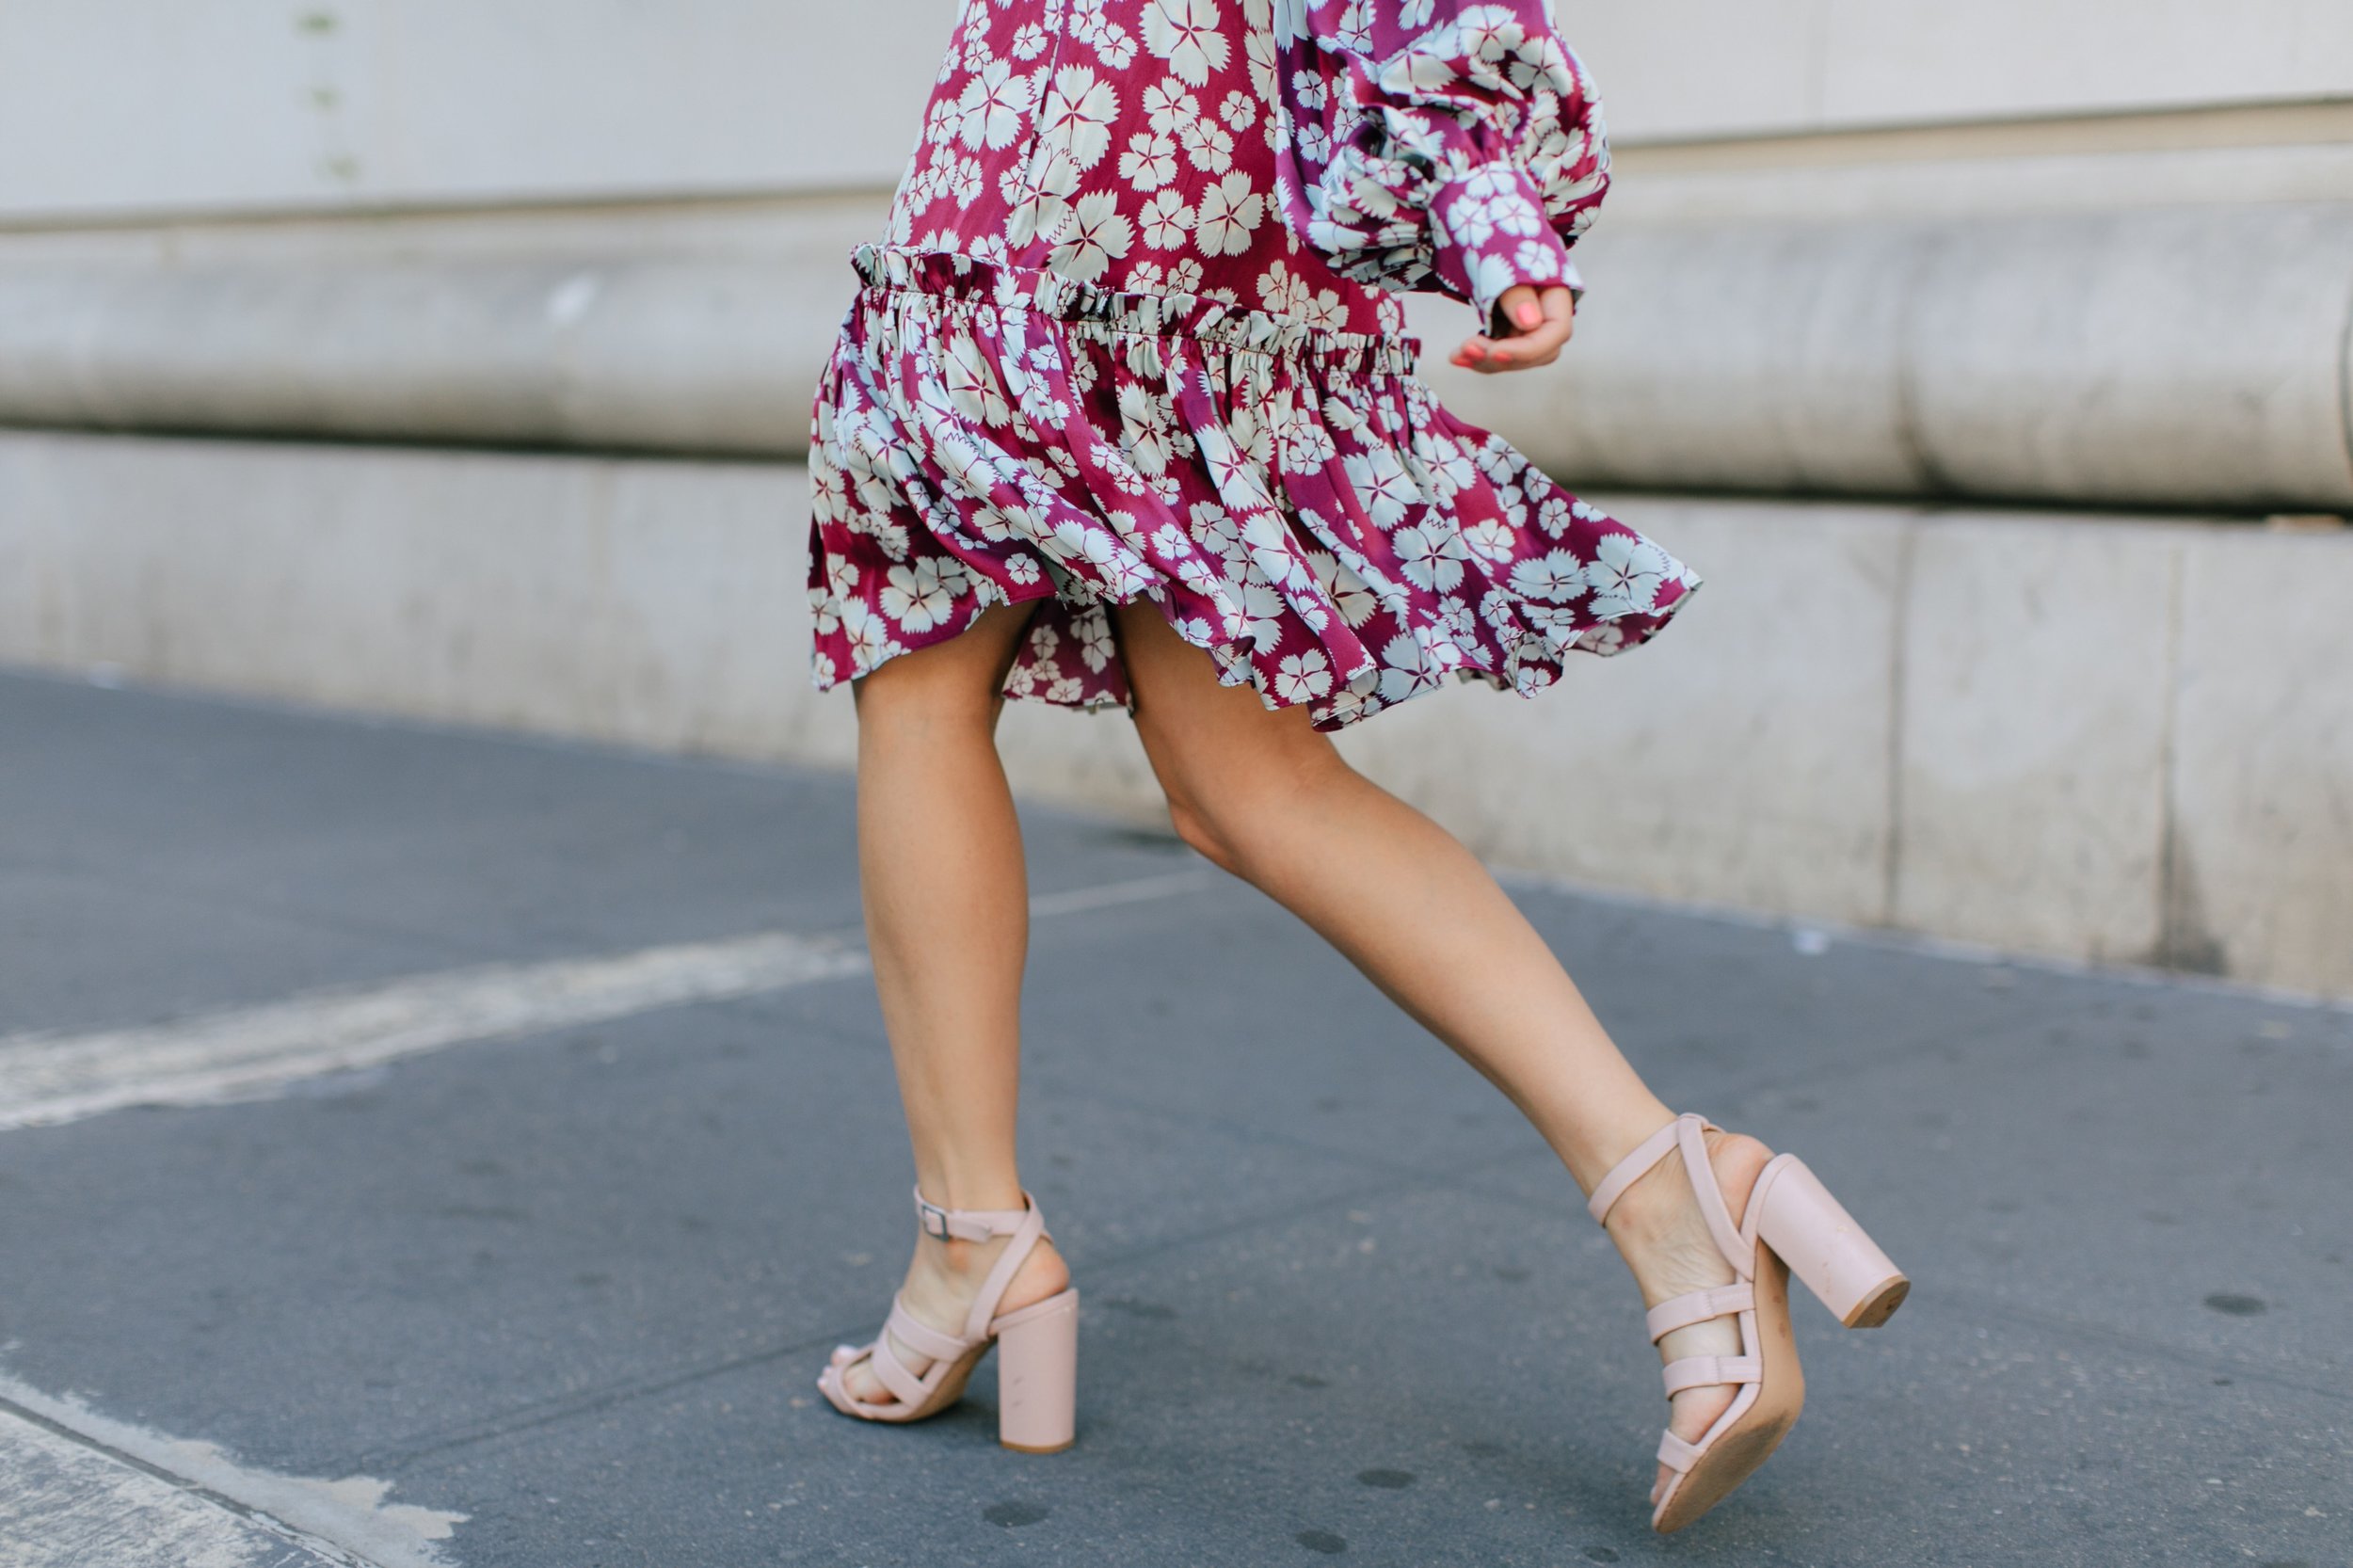 A Blogger’s Guide To Turning Your S.O. Into Your Photographer Cold Shoulder Floral Dress Esther Santer Fashion Blog NYC Street Style Blogger Outfit OOTD Trendy Designer Nordstrom Strappy Blush Pink Heels Circle Bag Shopping Wavy Hair Diamond Jewelry.jpg